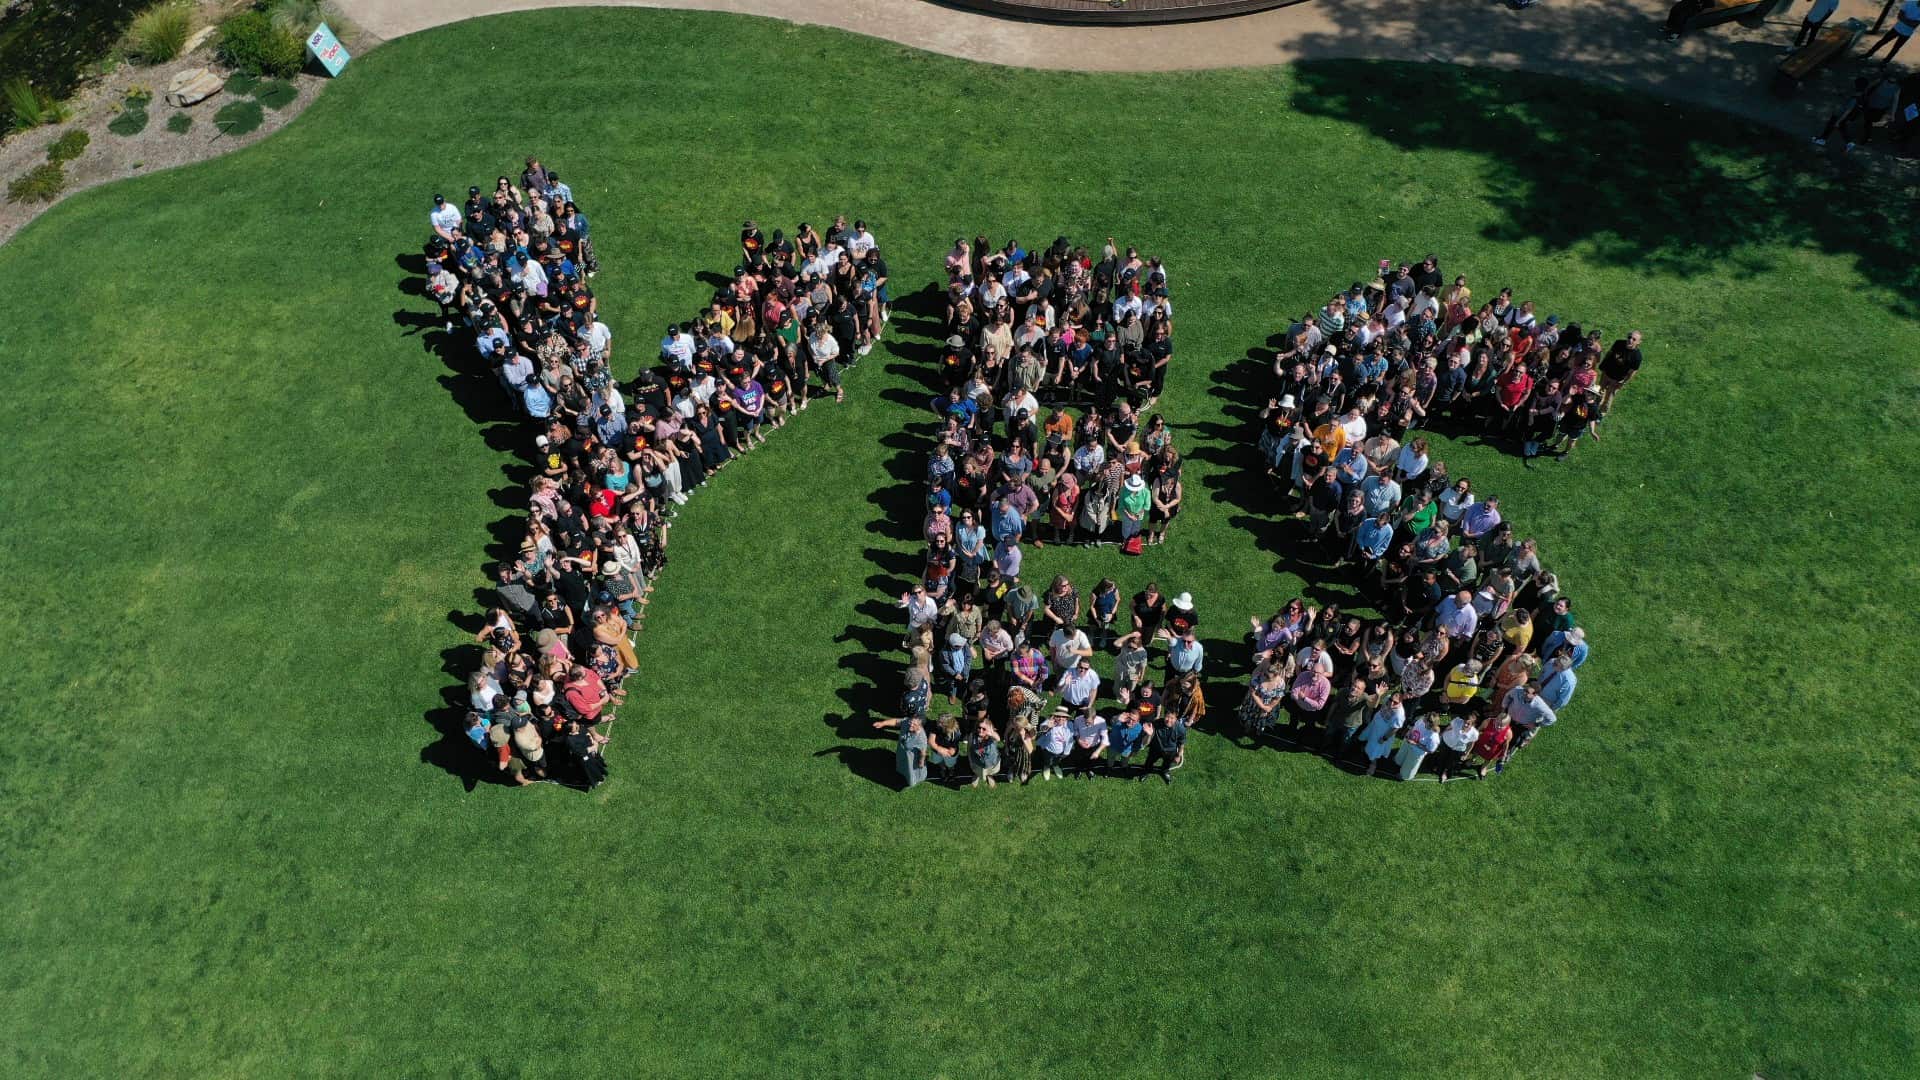 Hundreds of UOW staff form a giant Yes on the lawns of Wollongong campus. Photo: Tad Souden